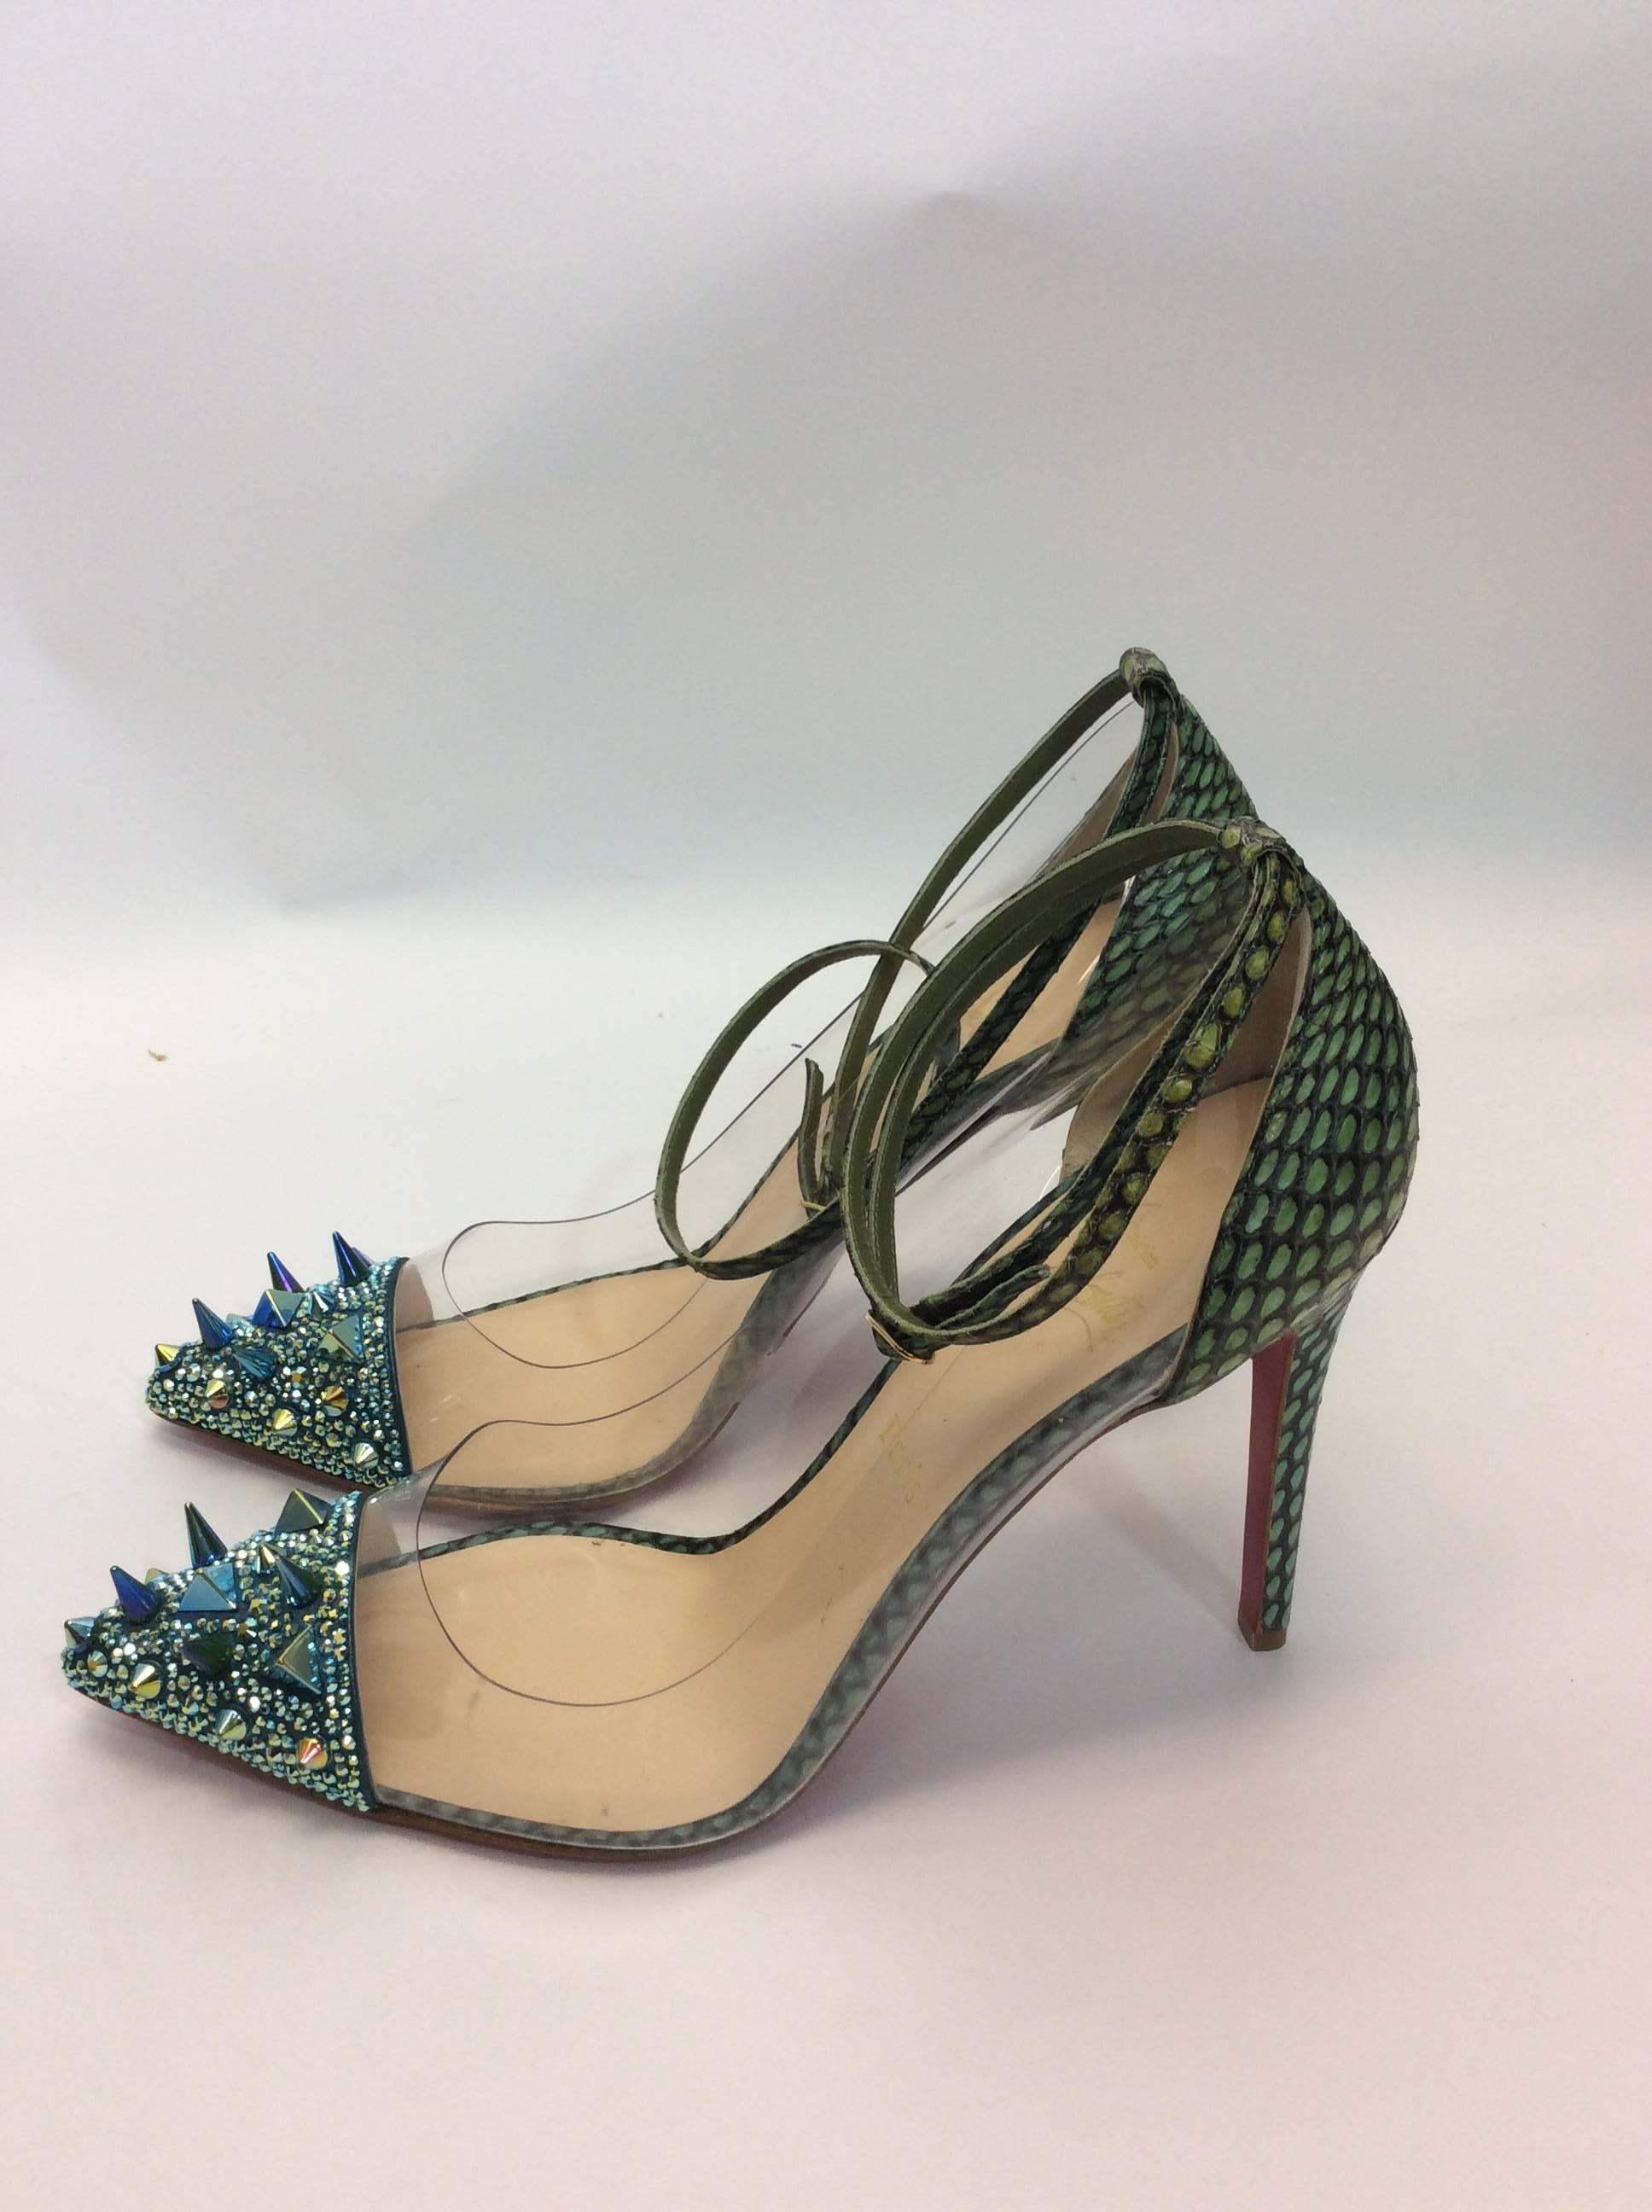 Christian Louboutin NIB Just Picks 100 Pot Pourri PVC Cobra Version Green Pumps
New in Box
Size 41
Original Price: $1,995
Heel is 4.5 inches
Exposed python detailing on heel 
Double wrap ankle strap
